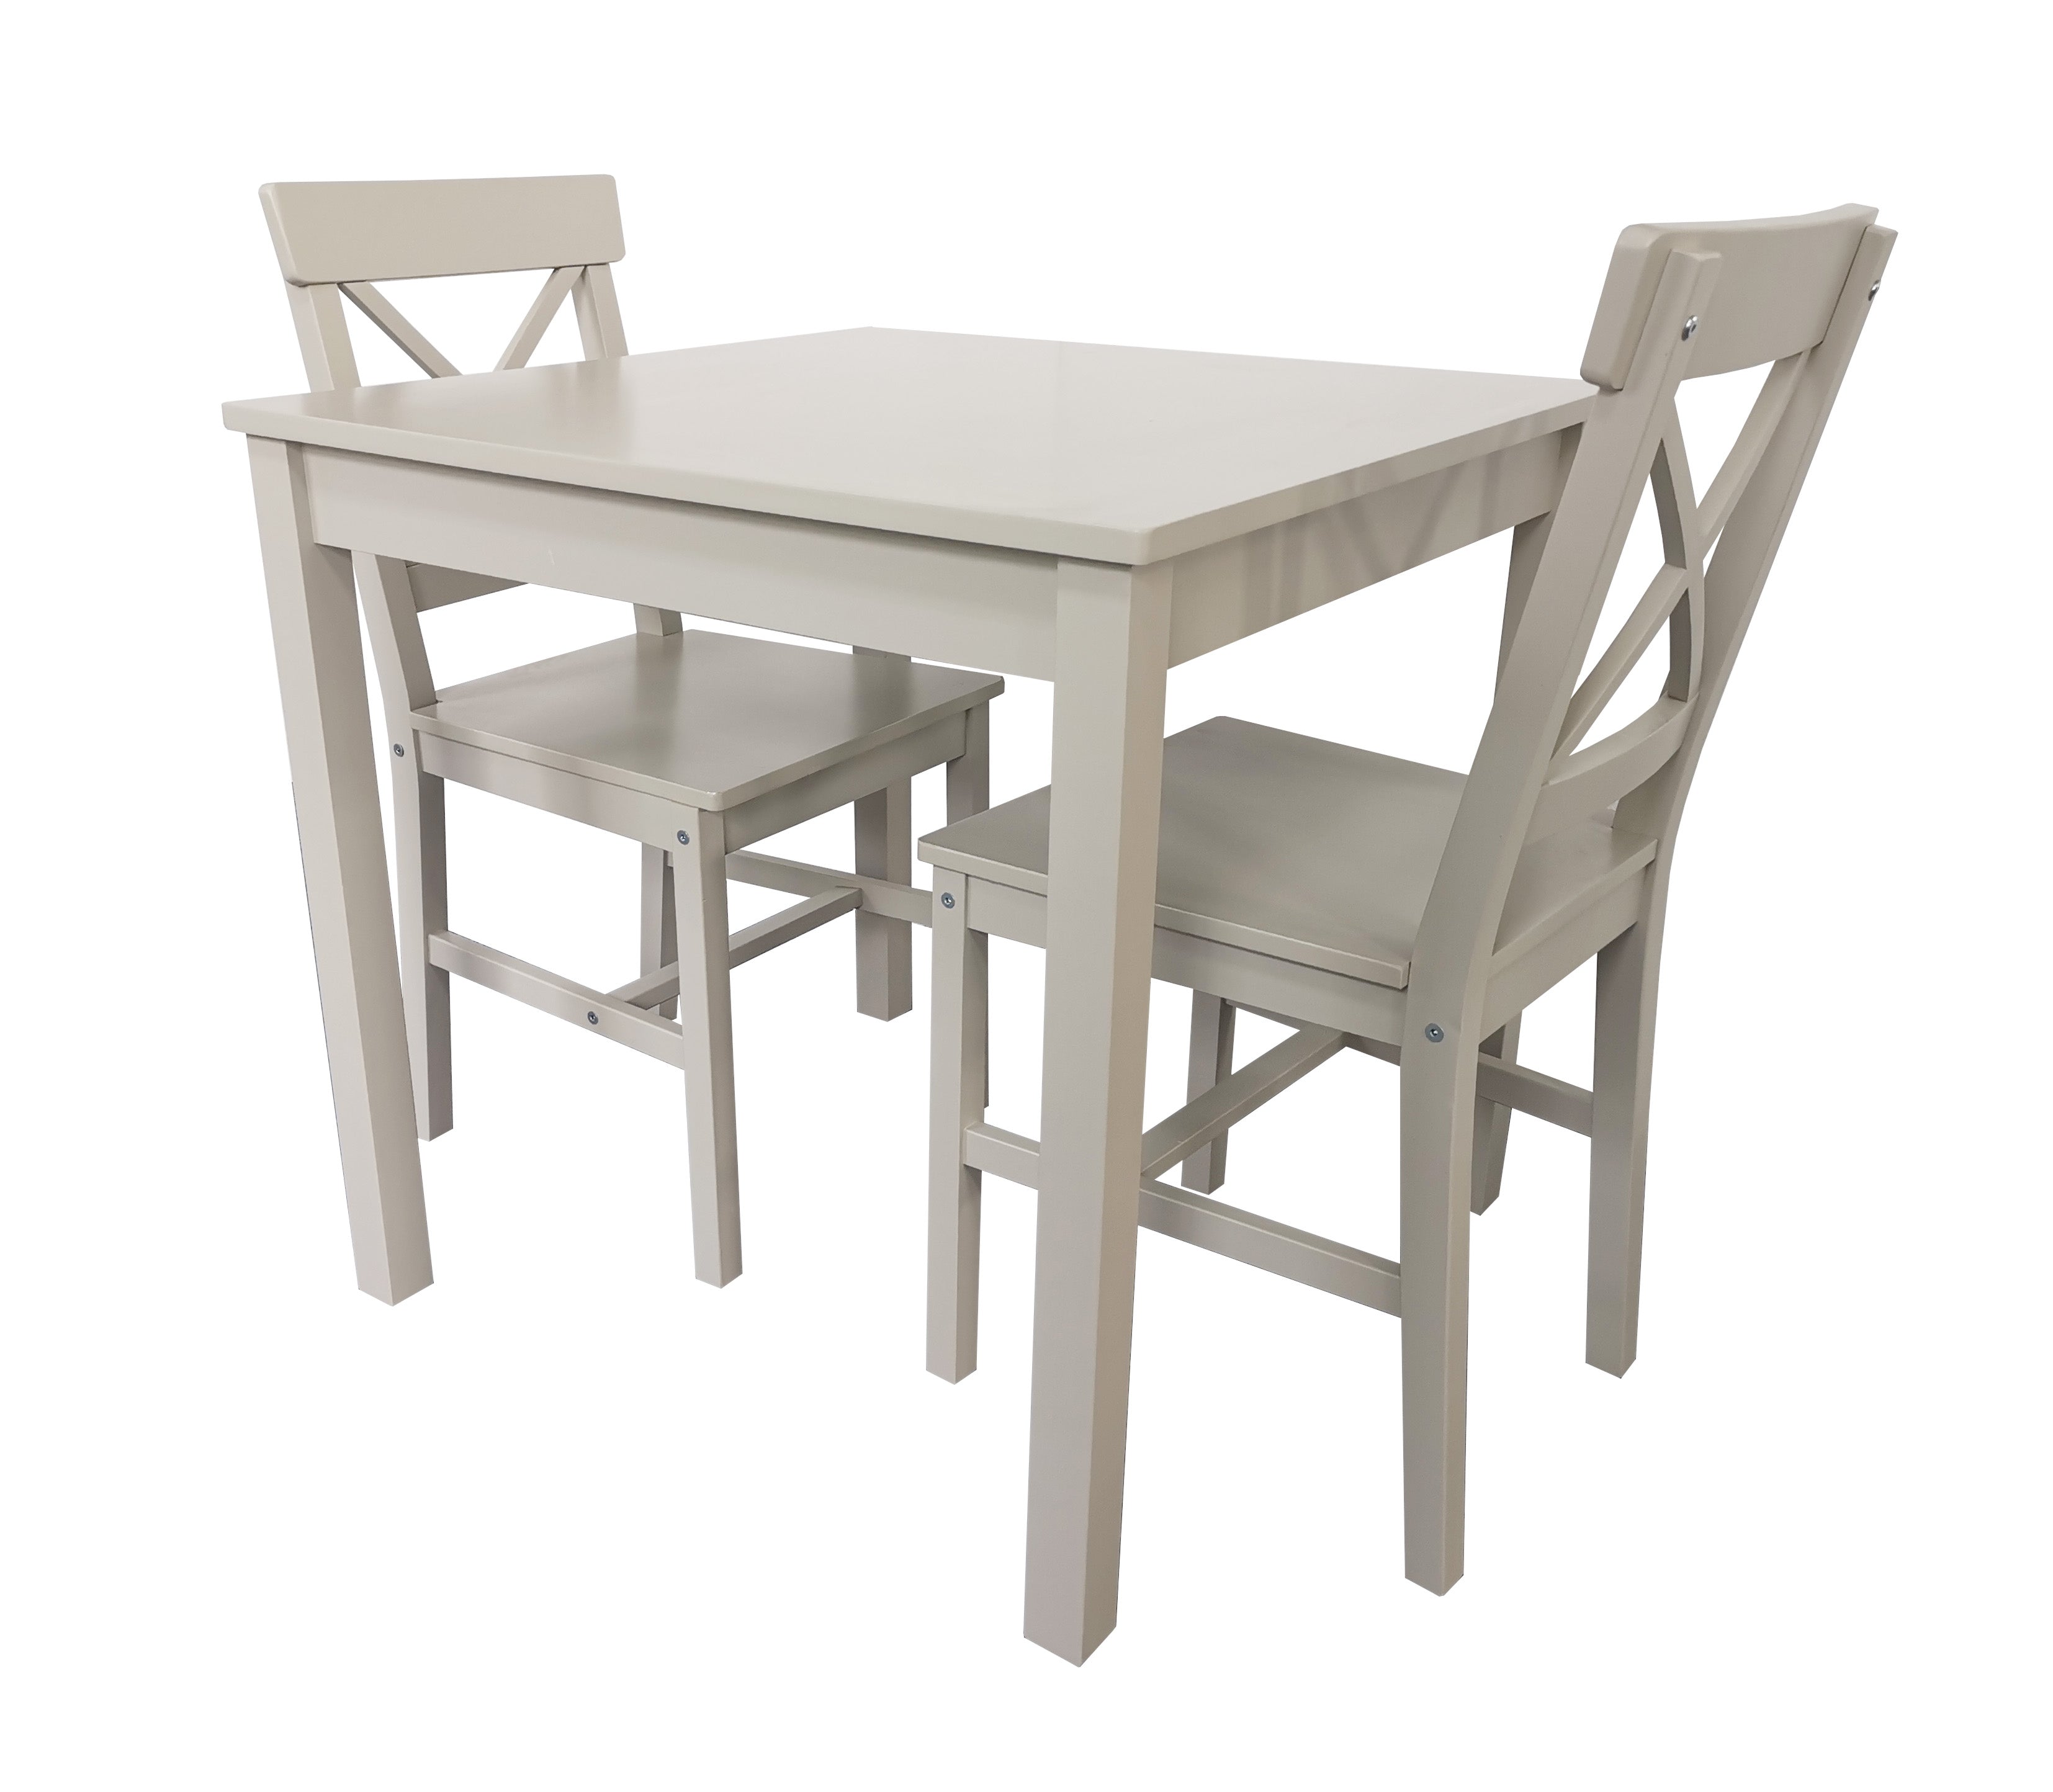 Teddys Collection Malaren 2 Seater Dining Set